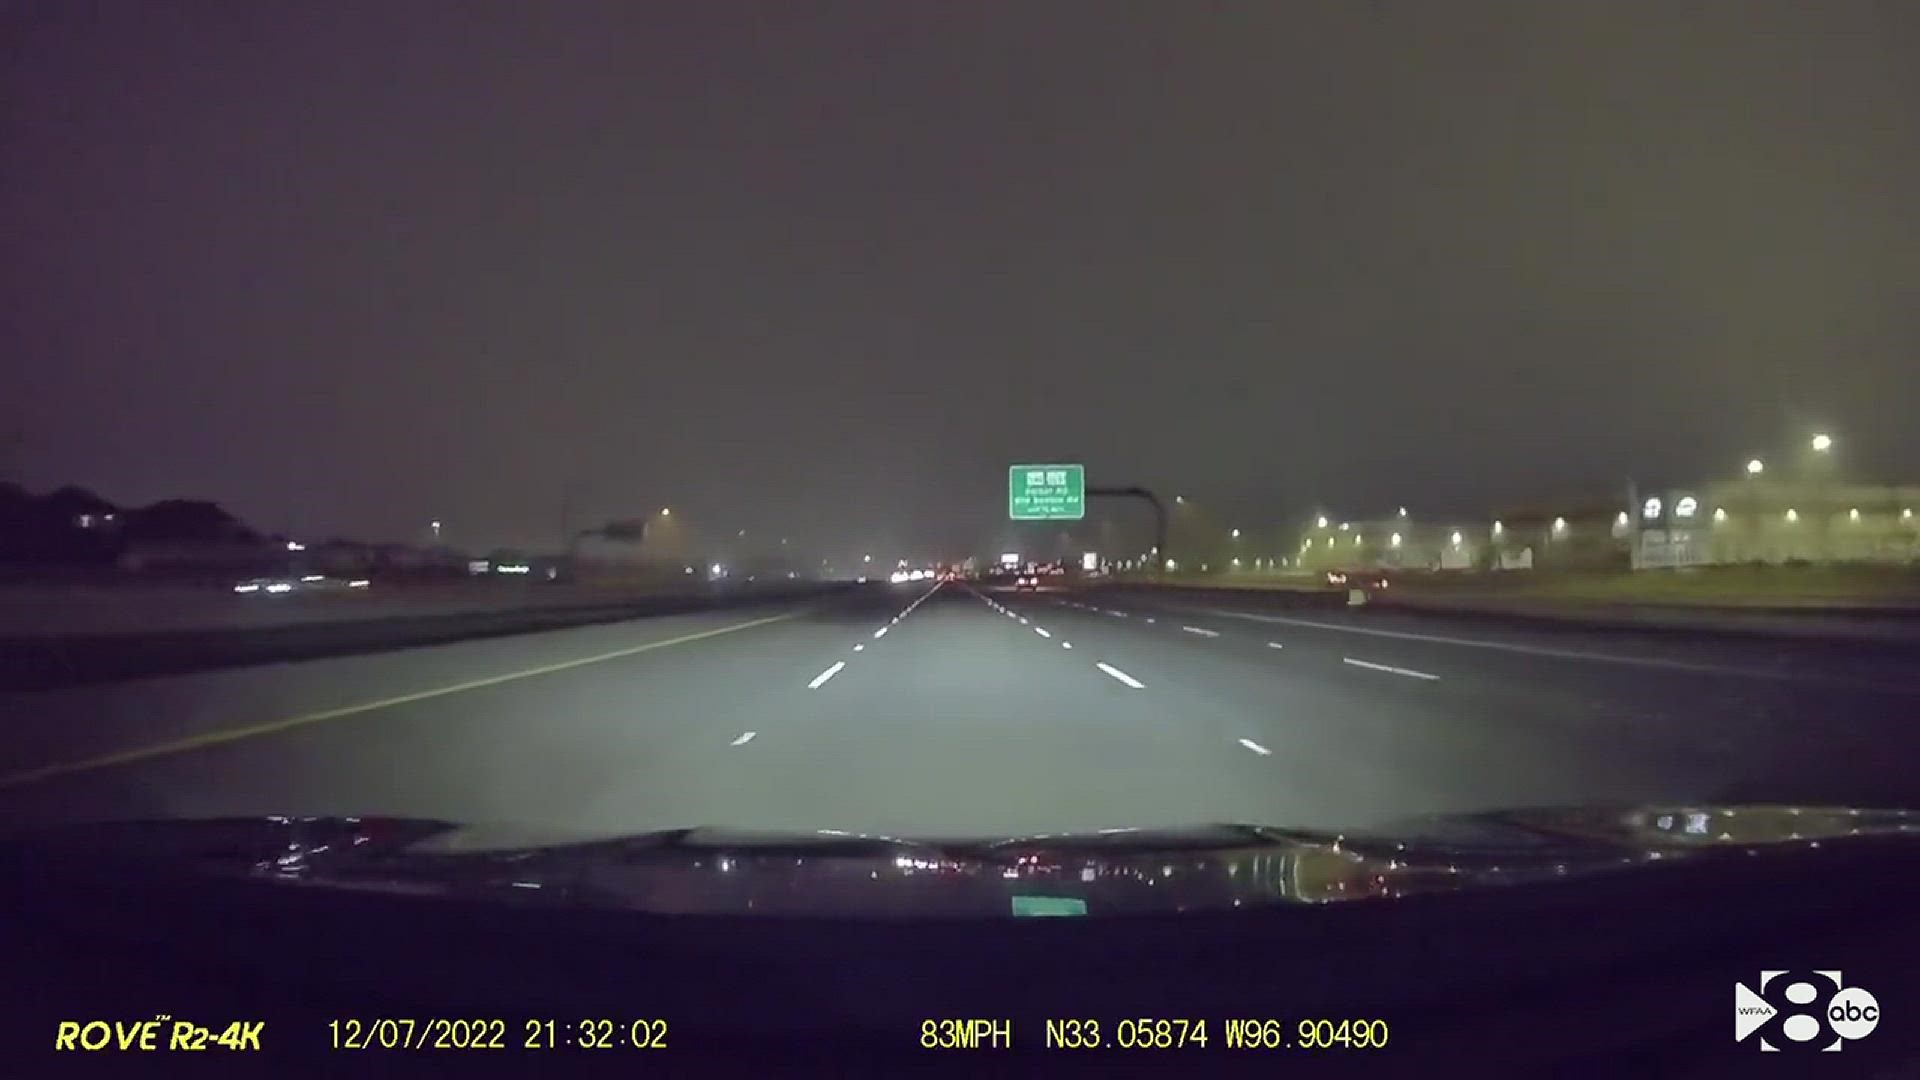 The video captures the moment one of two vehicles suspected of racing crashed into a third vehicle.